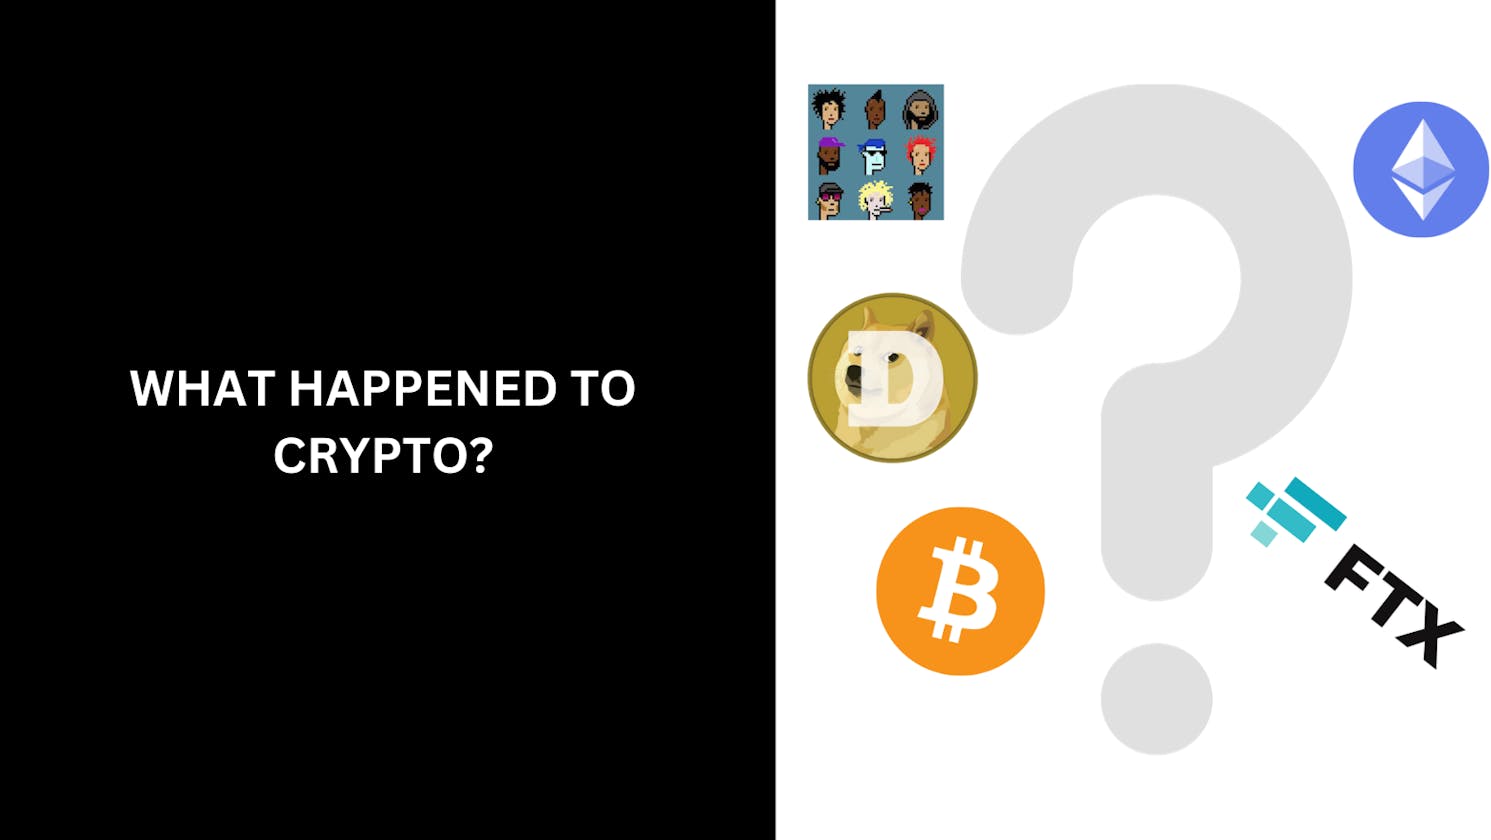 What happened to crypto?